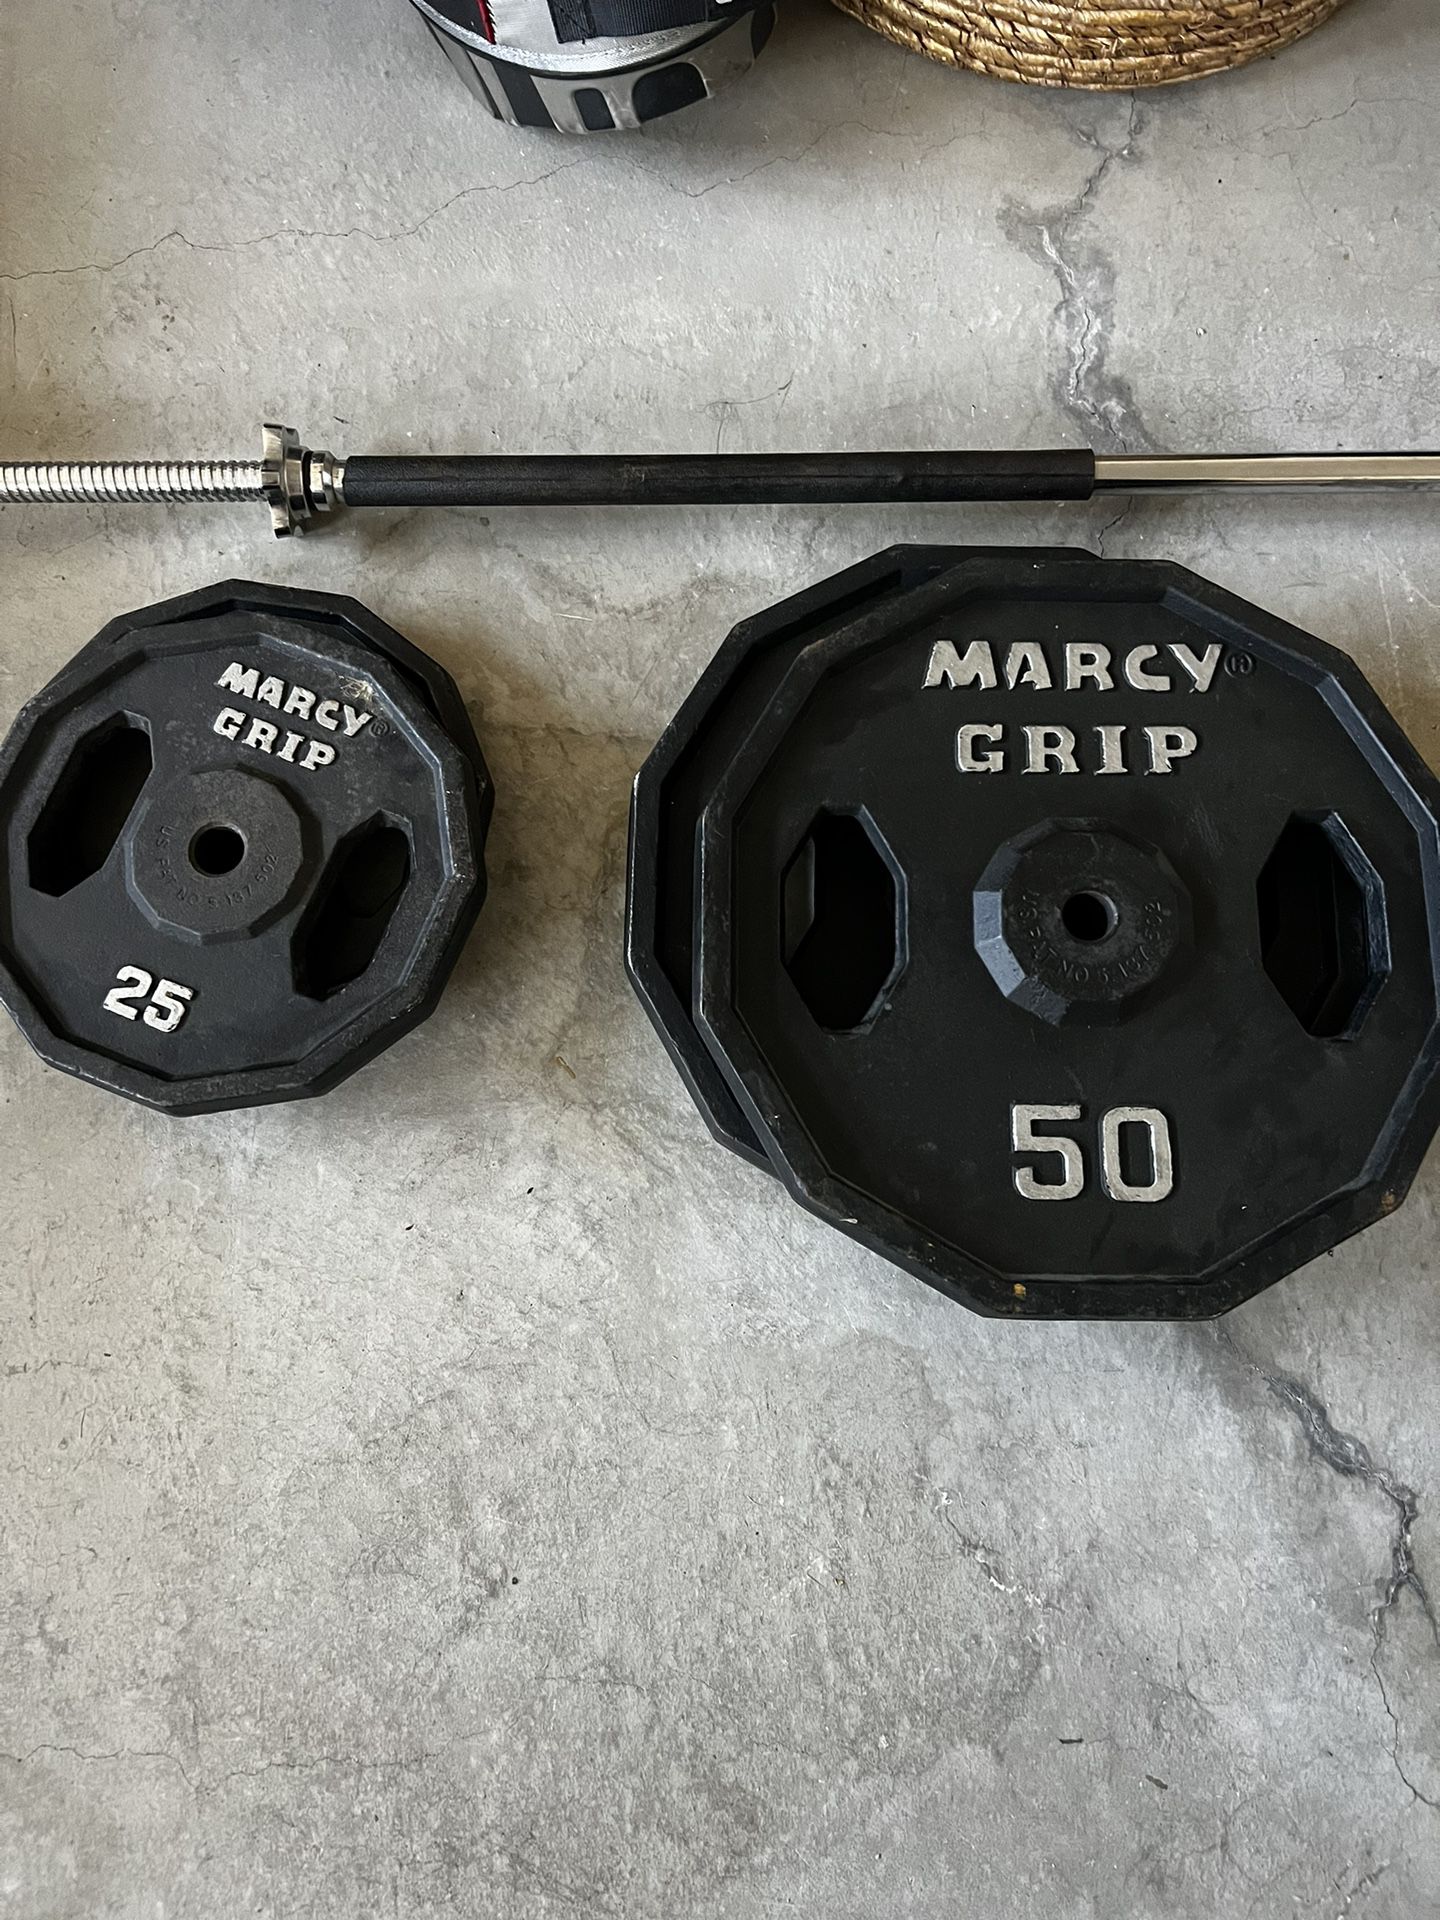 185 Pounds Barbell Weights Plus 7 Ft Bar